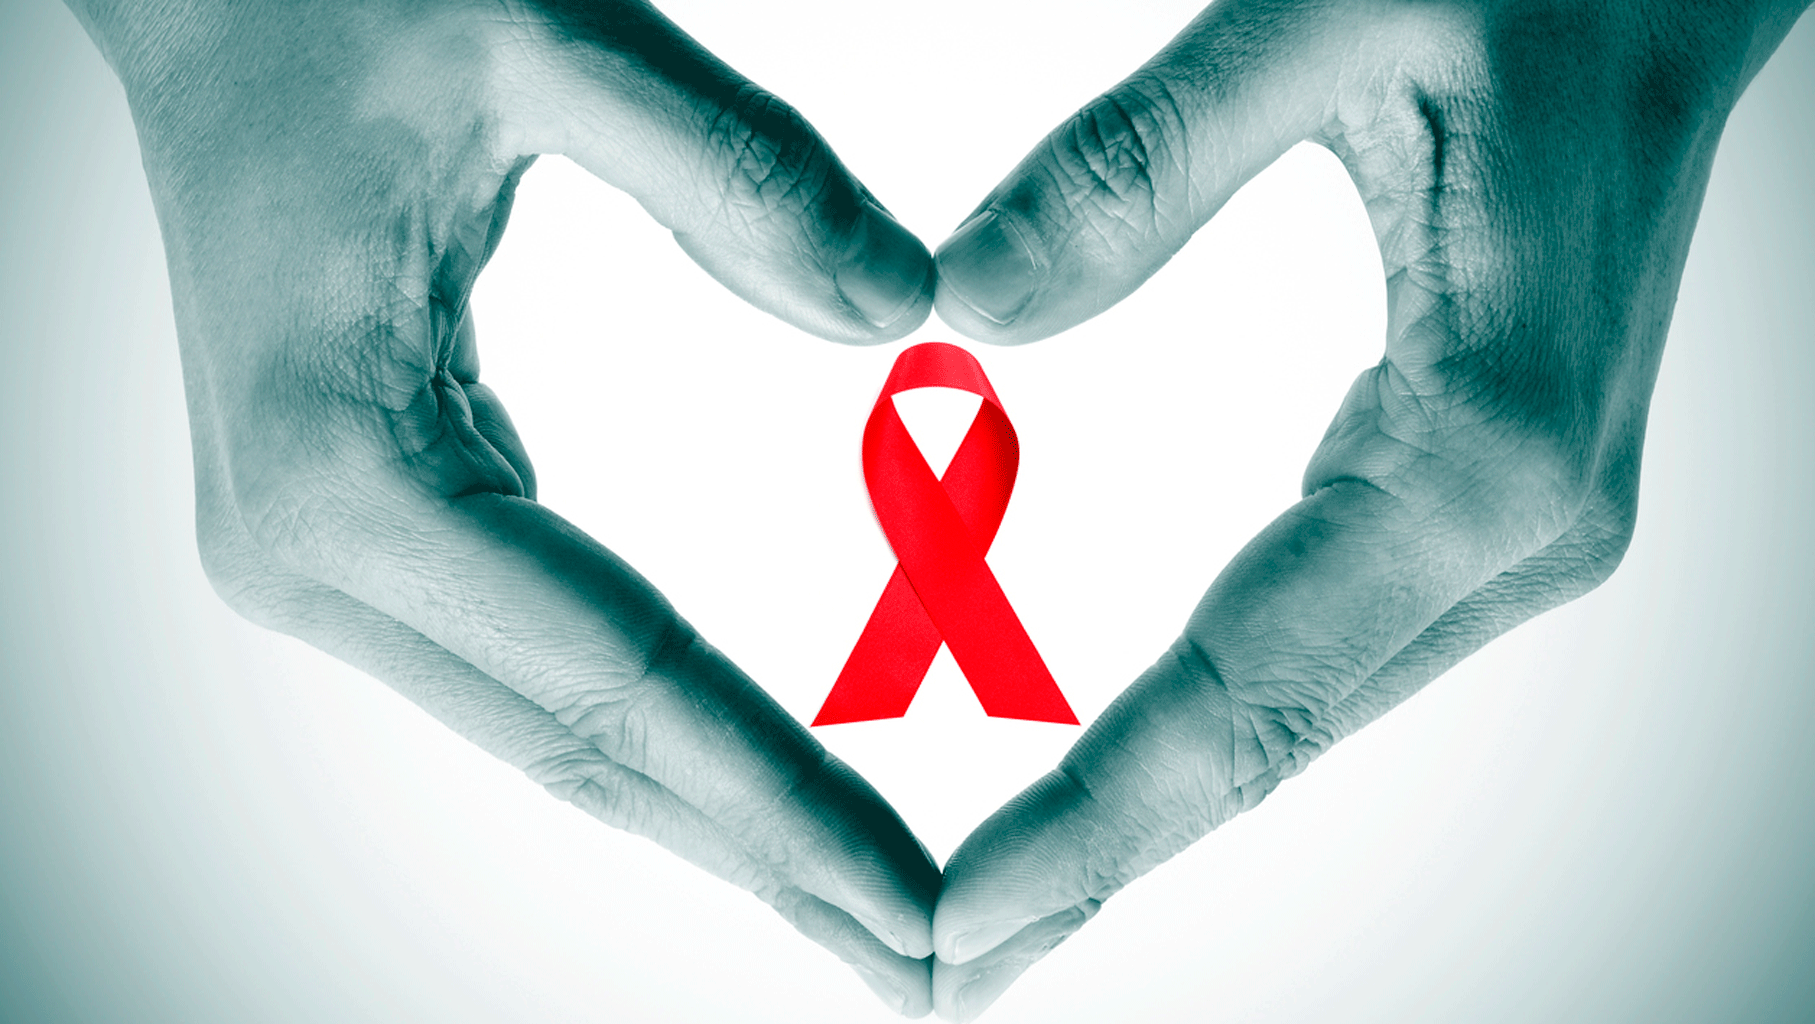 The study revealed that awareness among people and awkwardness to talk about HIV-AIDS still remains a major concern.